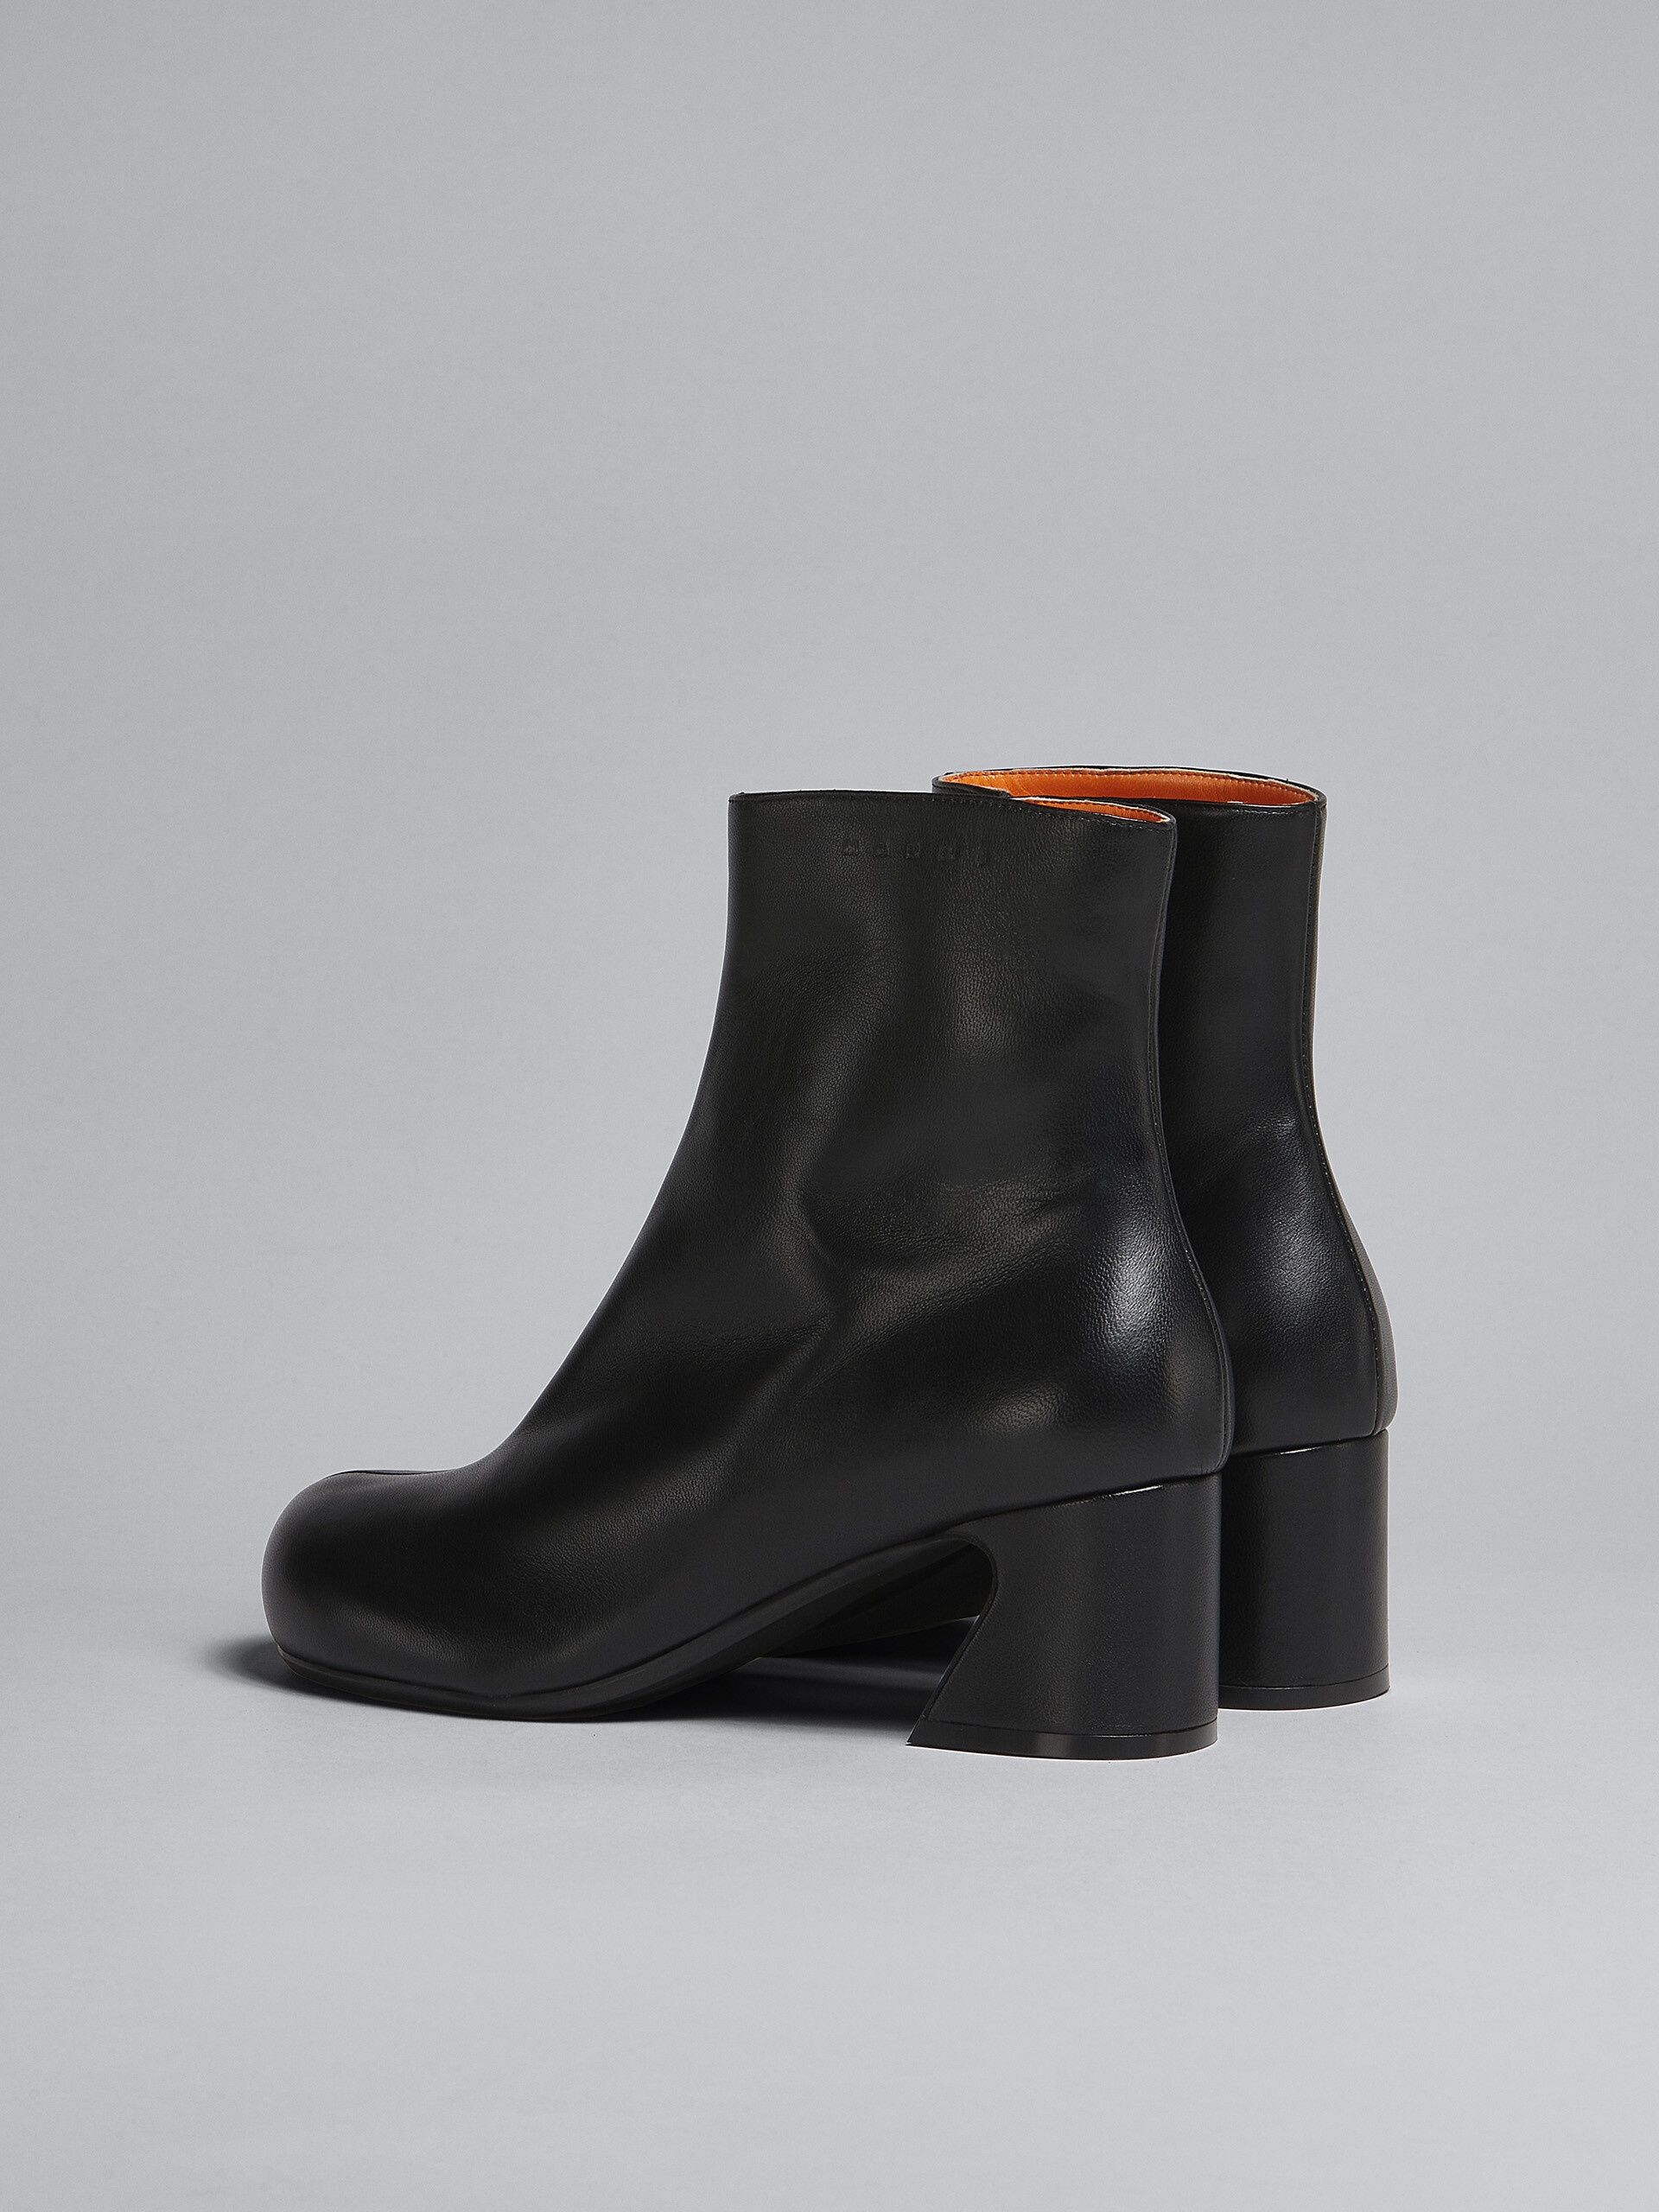 BLACK LEATHER ANKLE BOOT - 3